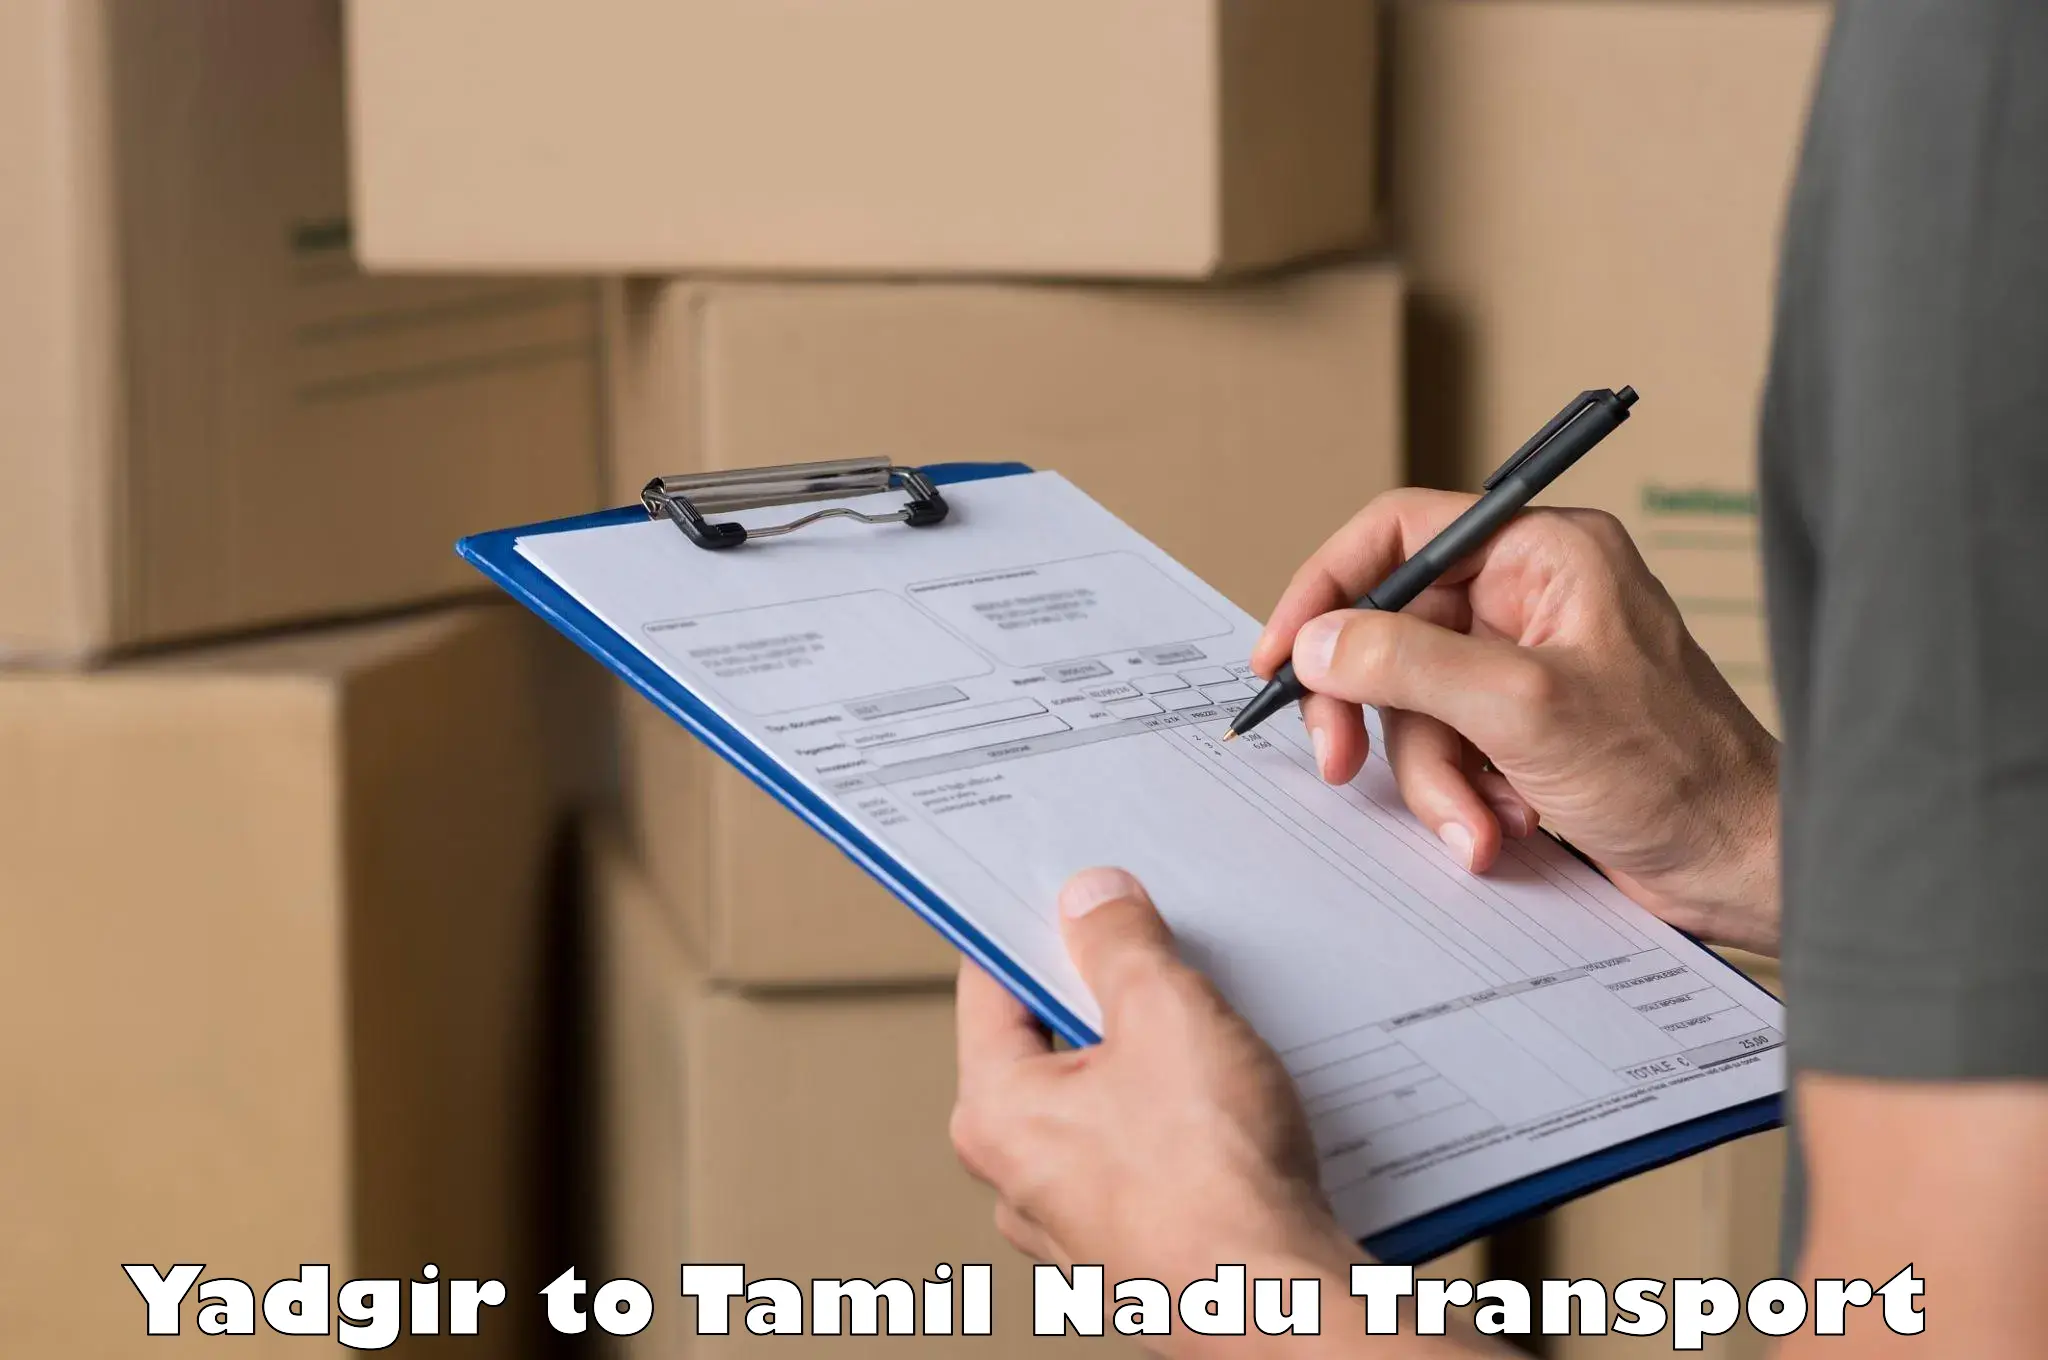 Container transport service Yadgir to Ranipet